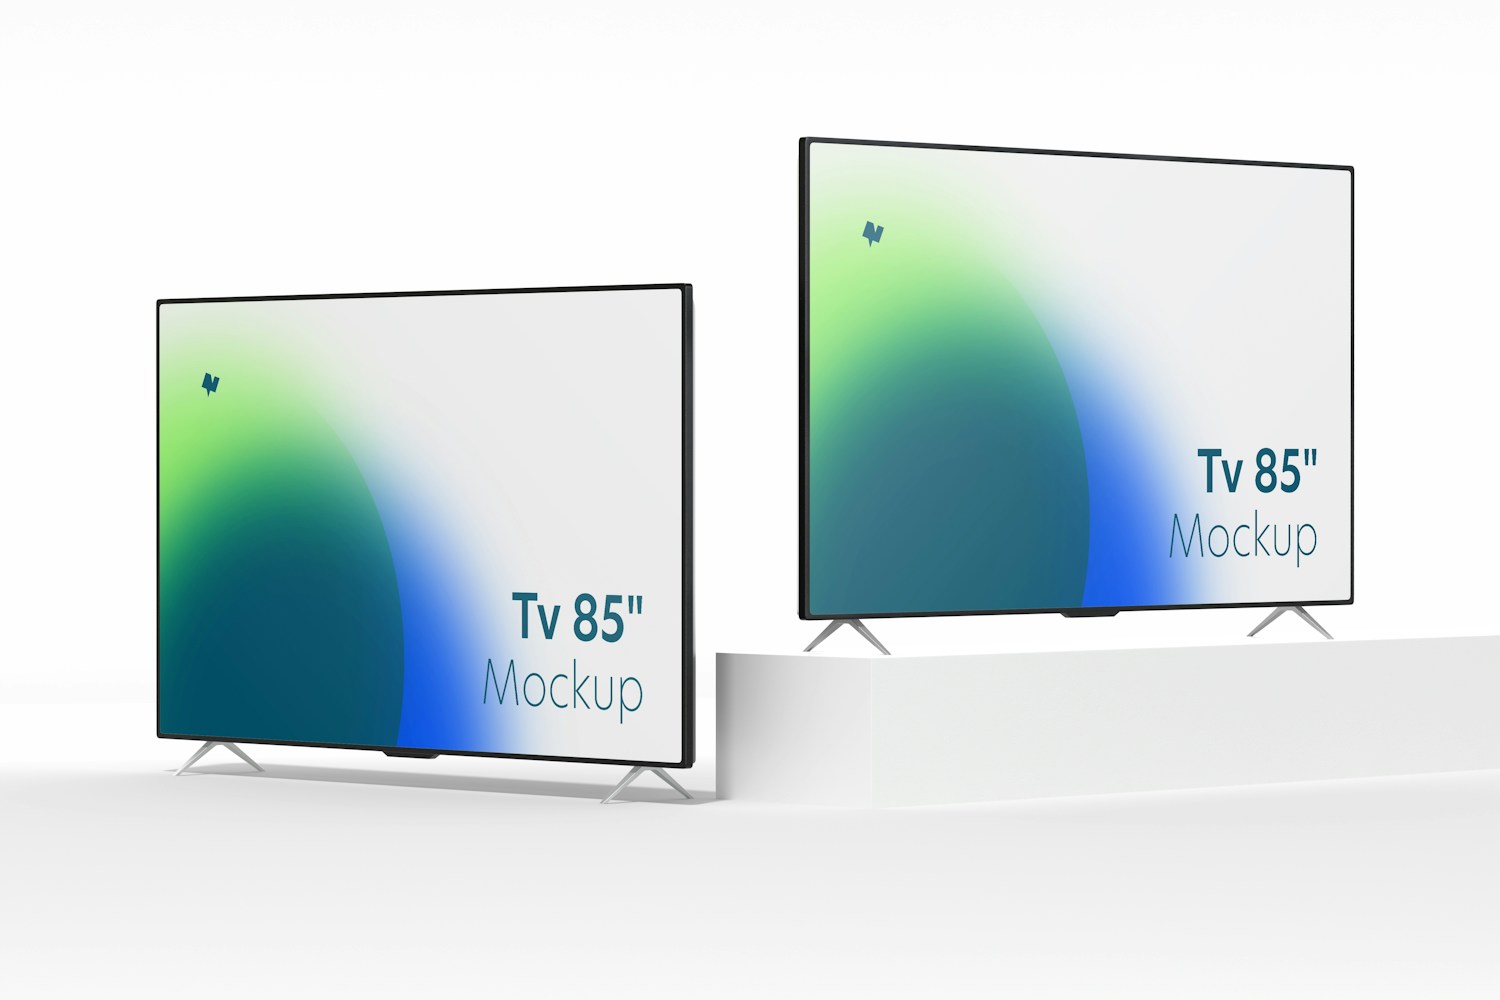 TVs 85" Mockup, Left and Right View